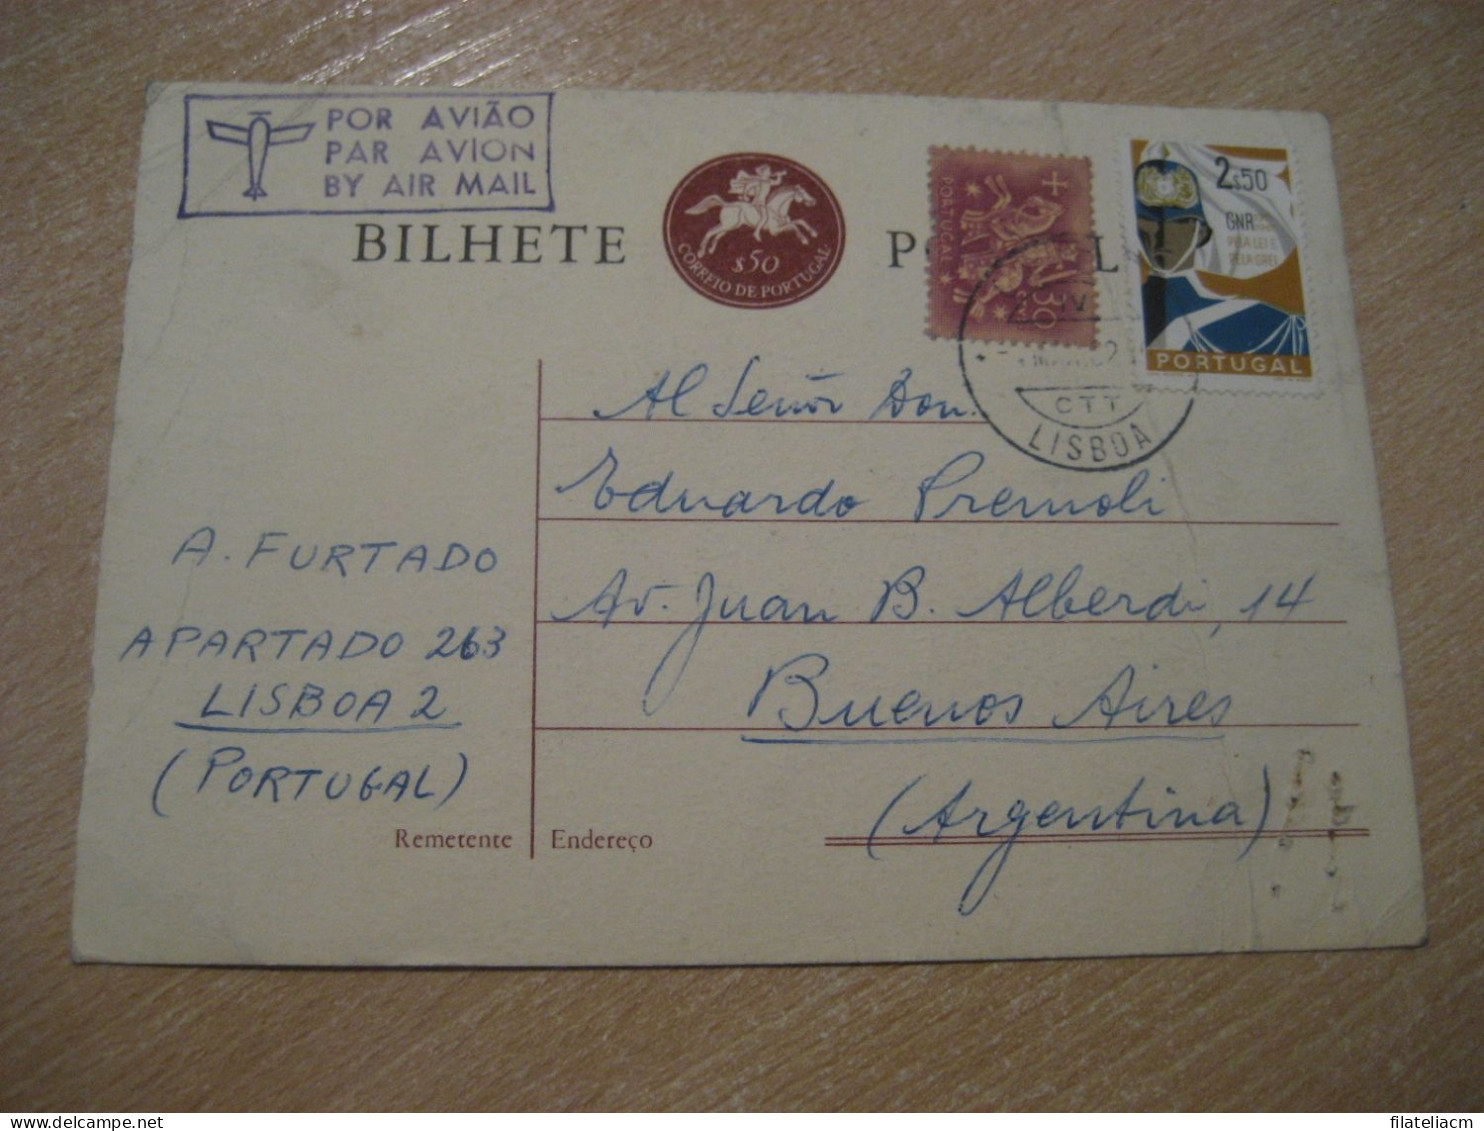 LISBOA 1962 To Buenos Aires Argentina Air Mail Cancel Folded  Bilhete Postal Stationery Card PORTUGAL - Covers & Documents